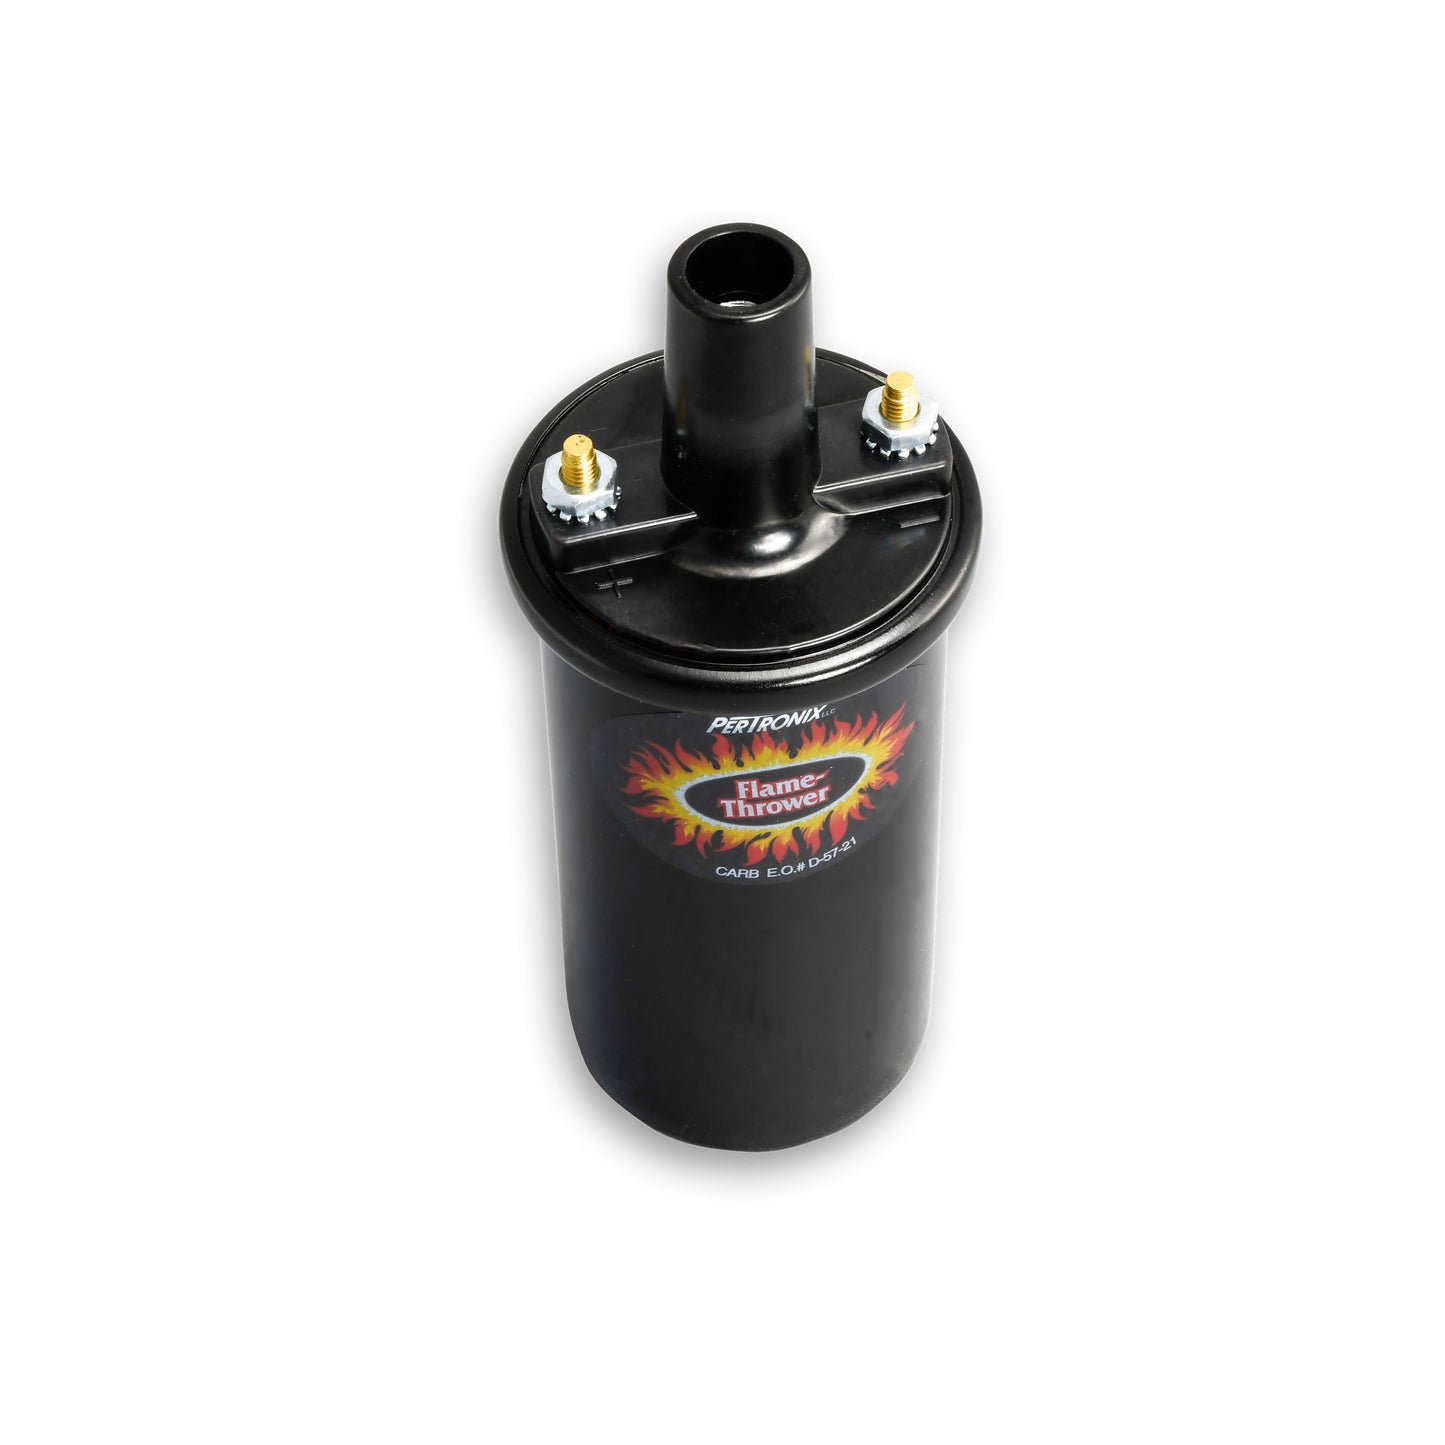 PerTronix 45011 Flame-Thrower II Coil 45,000 Volt 0.6 ohm Black